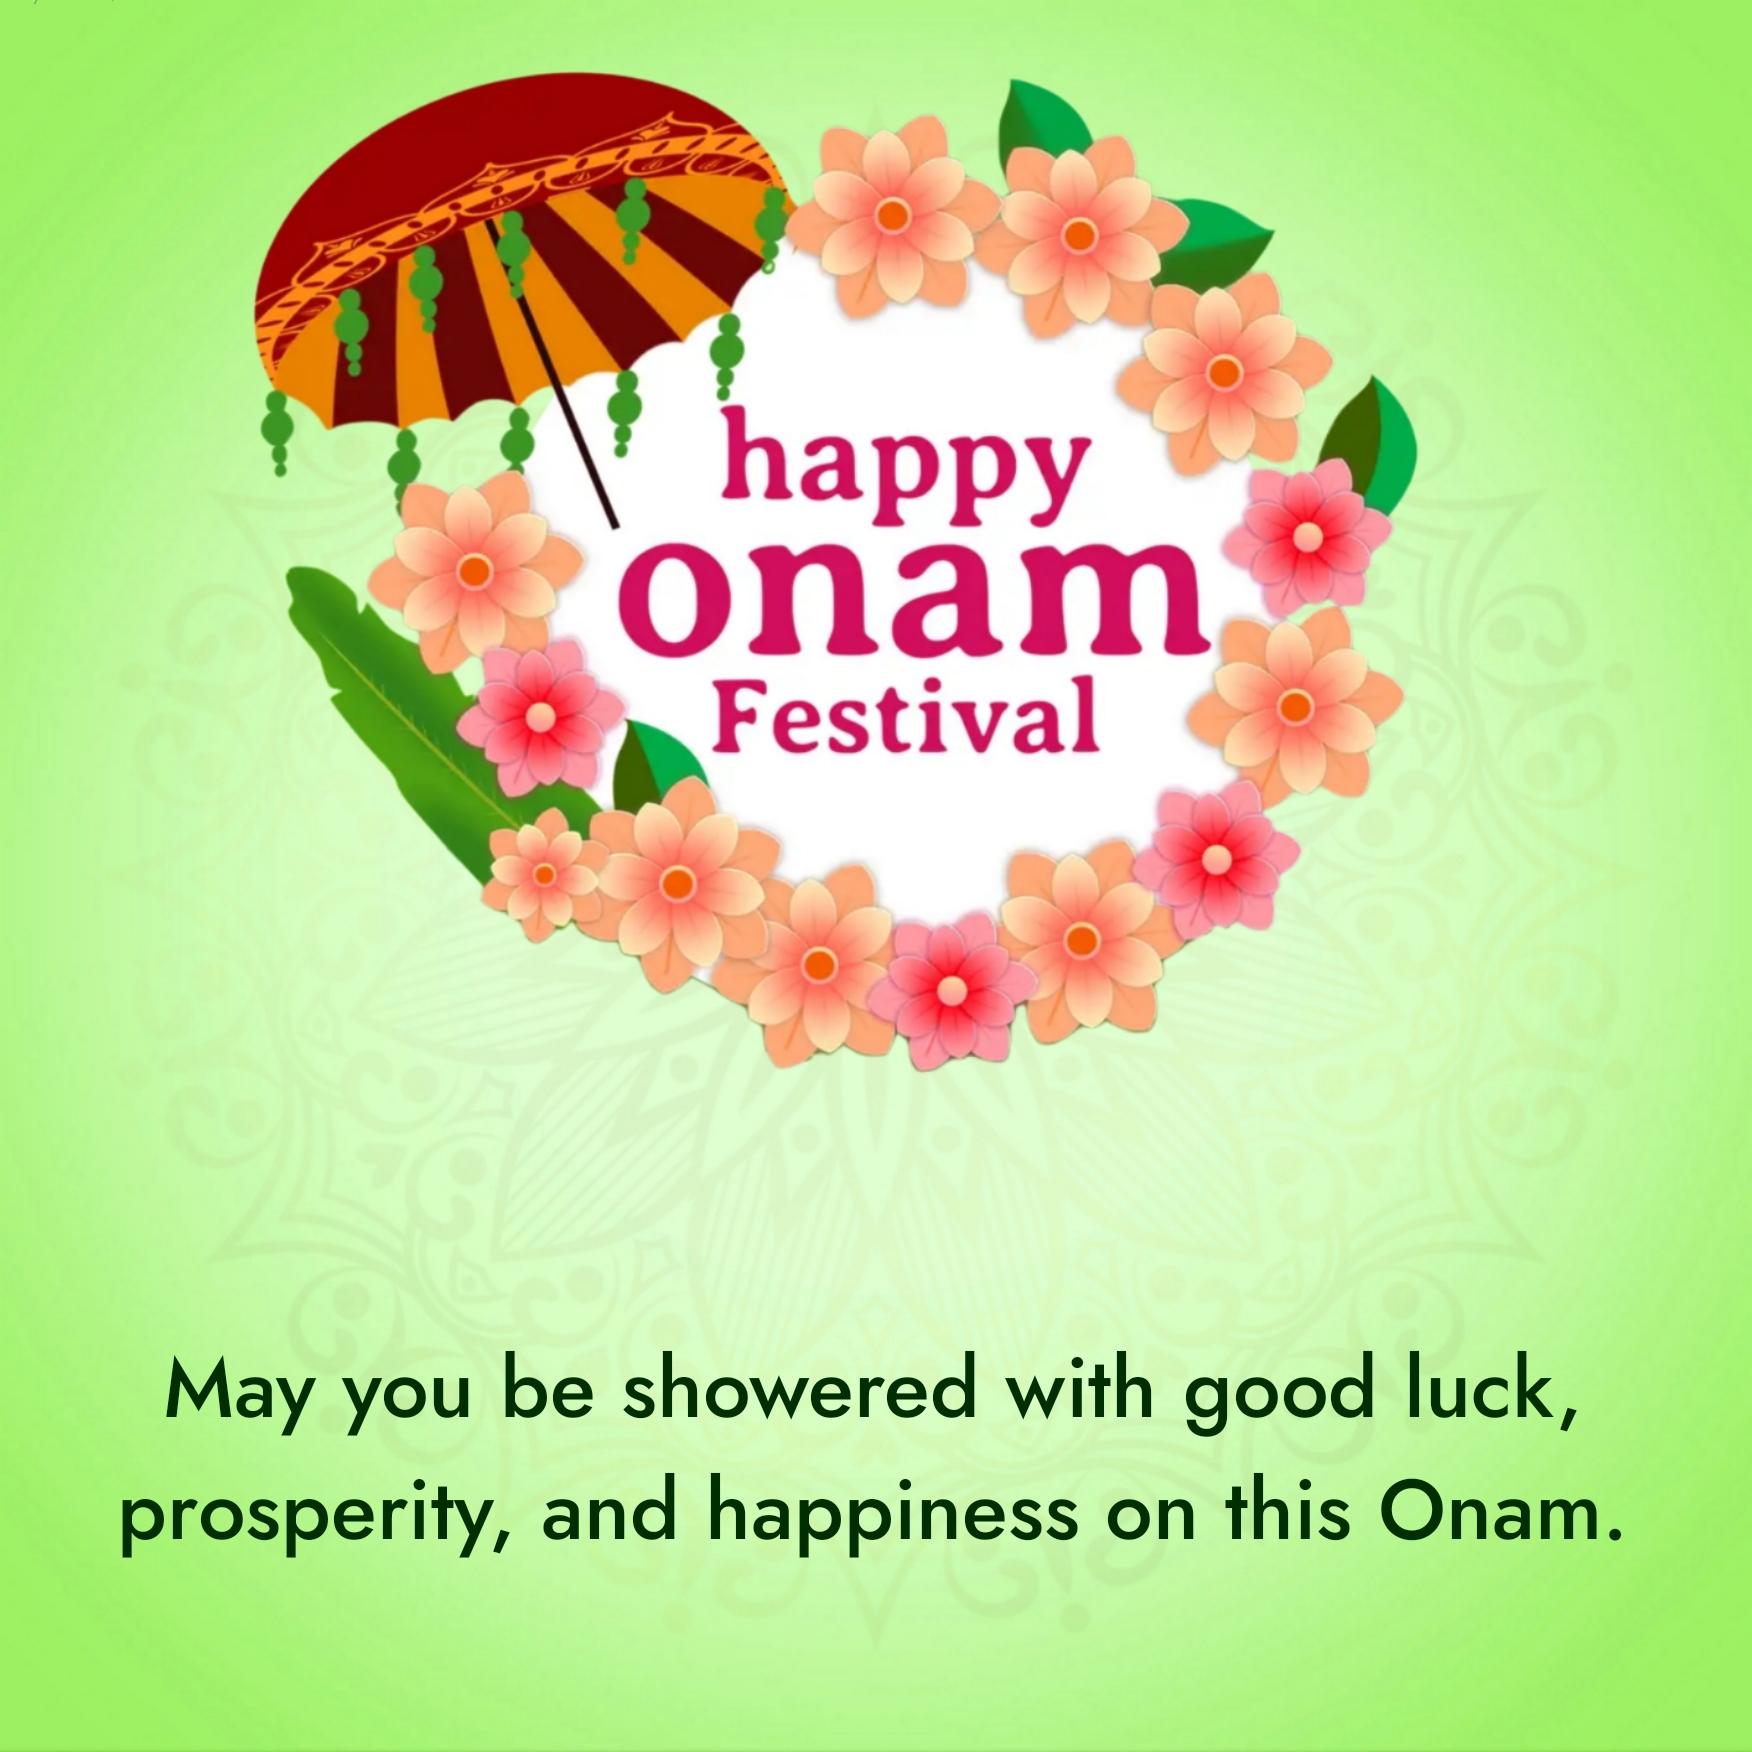 May you be showered with good luck prosperity and happiness on this Onam